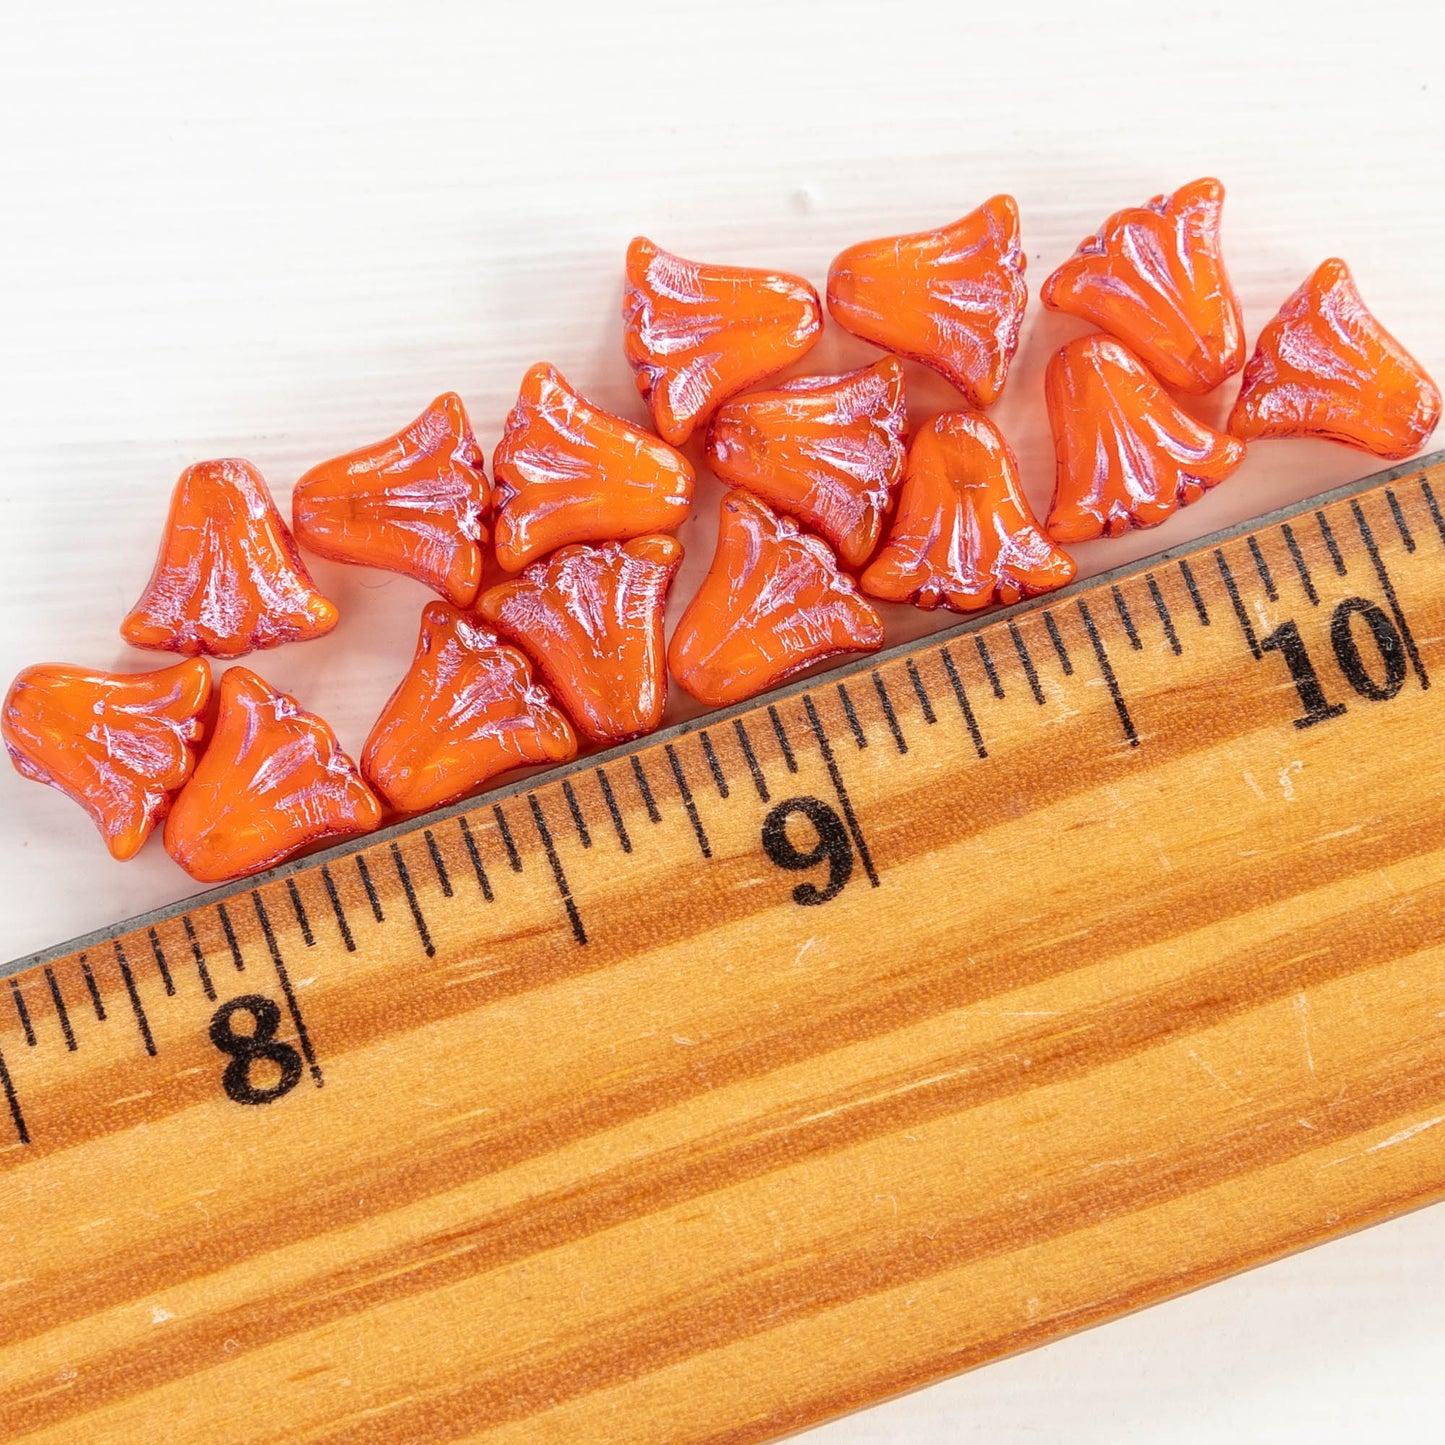 9x10mm Lily / Tulip Flower Beads - Orange Opaline with Shiny Pink Wash - 15 Beads